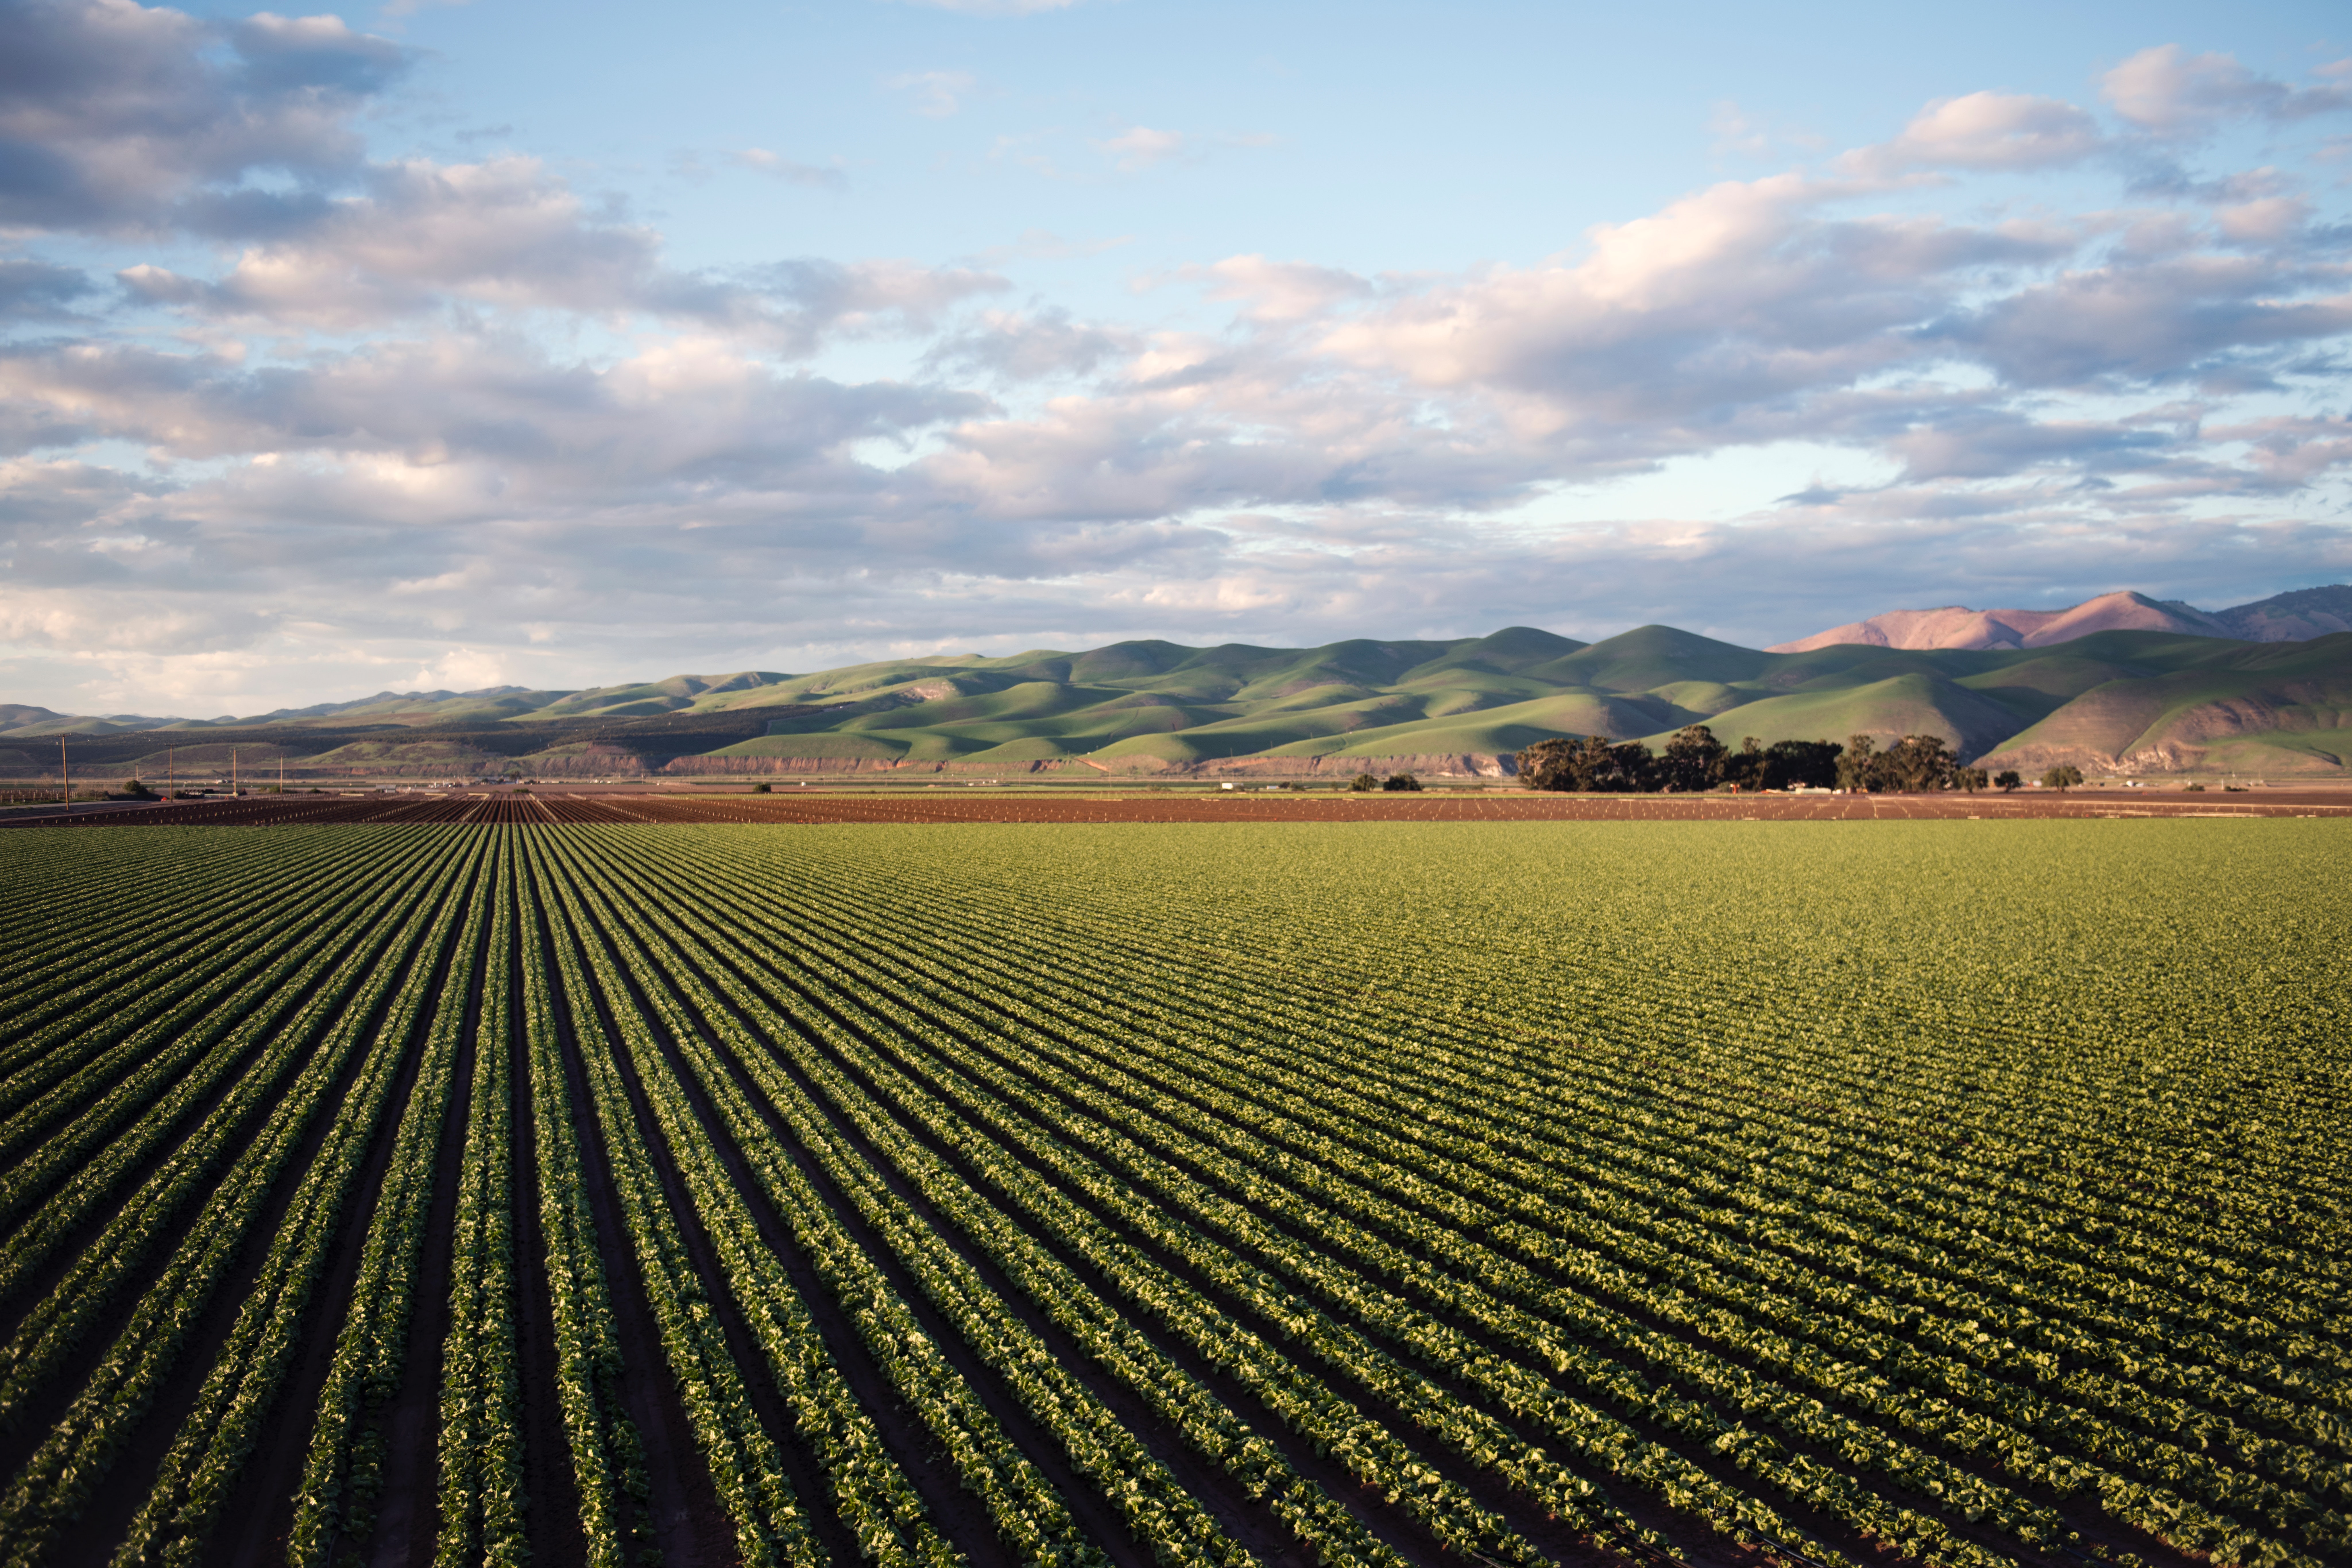 Rows of crops with rolling hills in the background